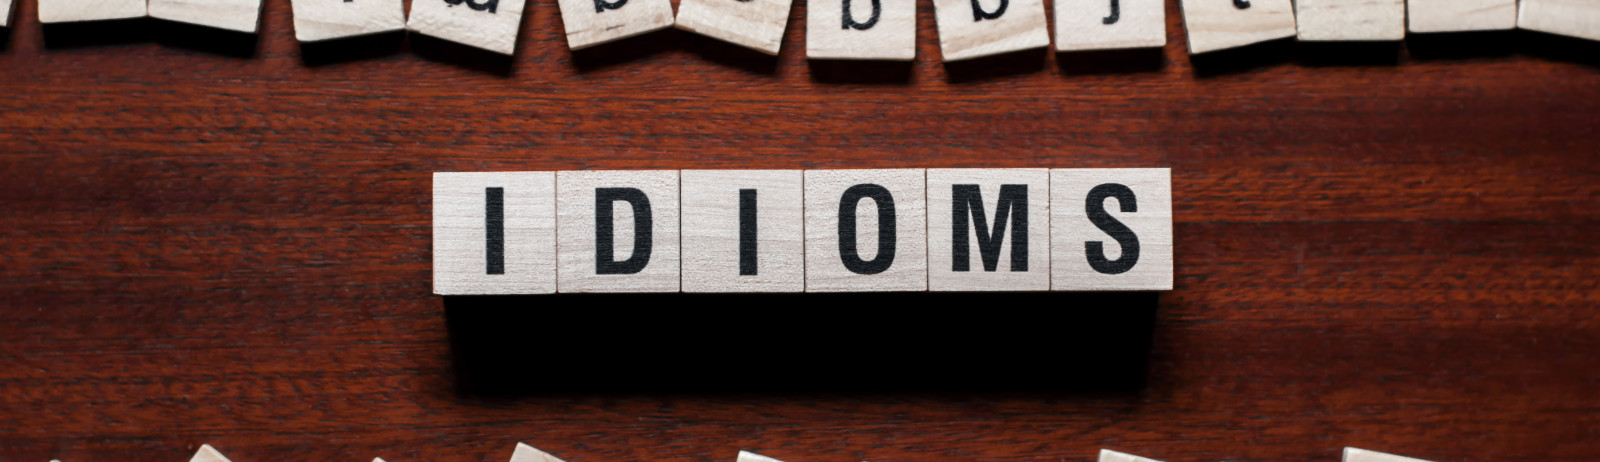 The word "idiom" spelled on wooden cubes.